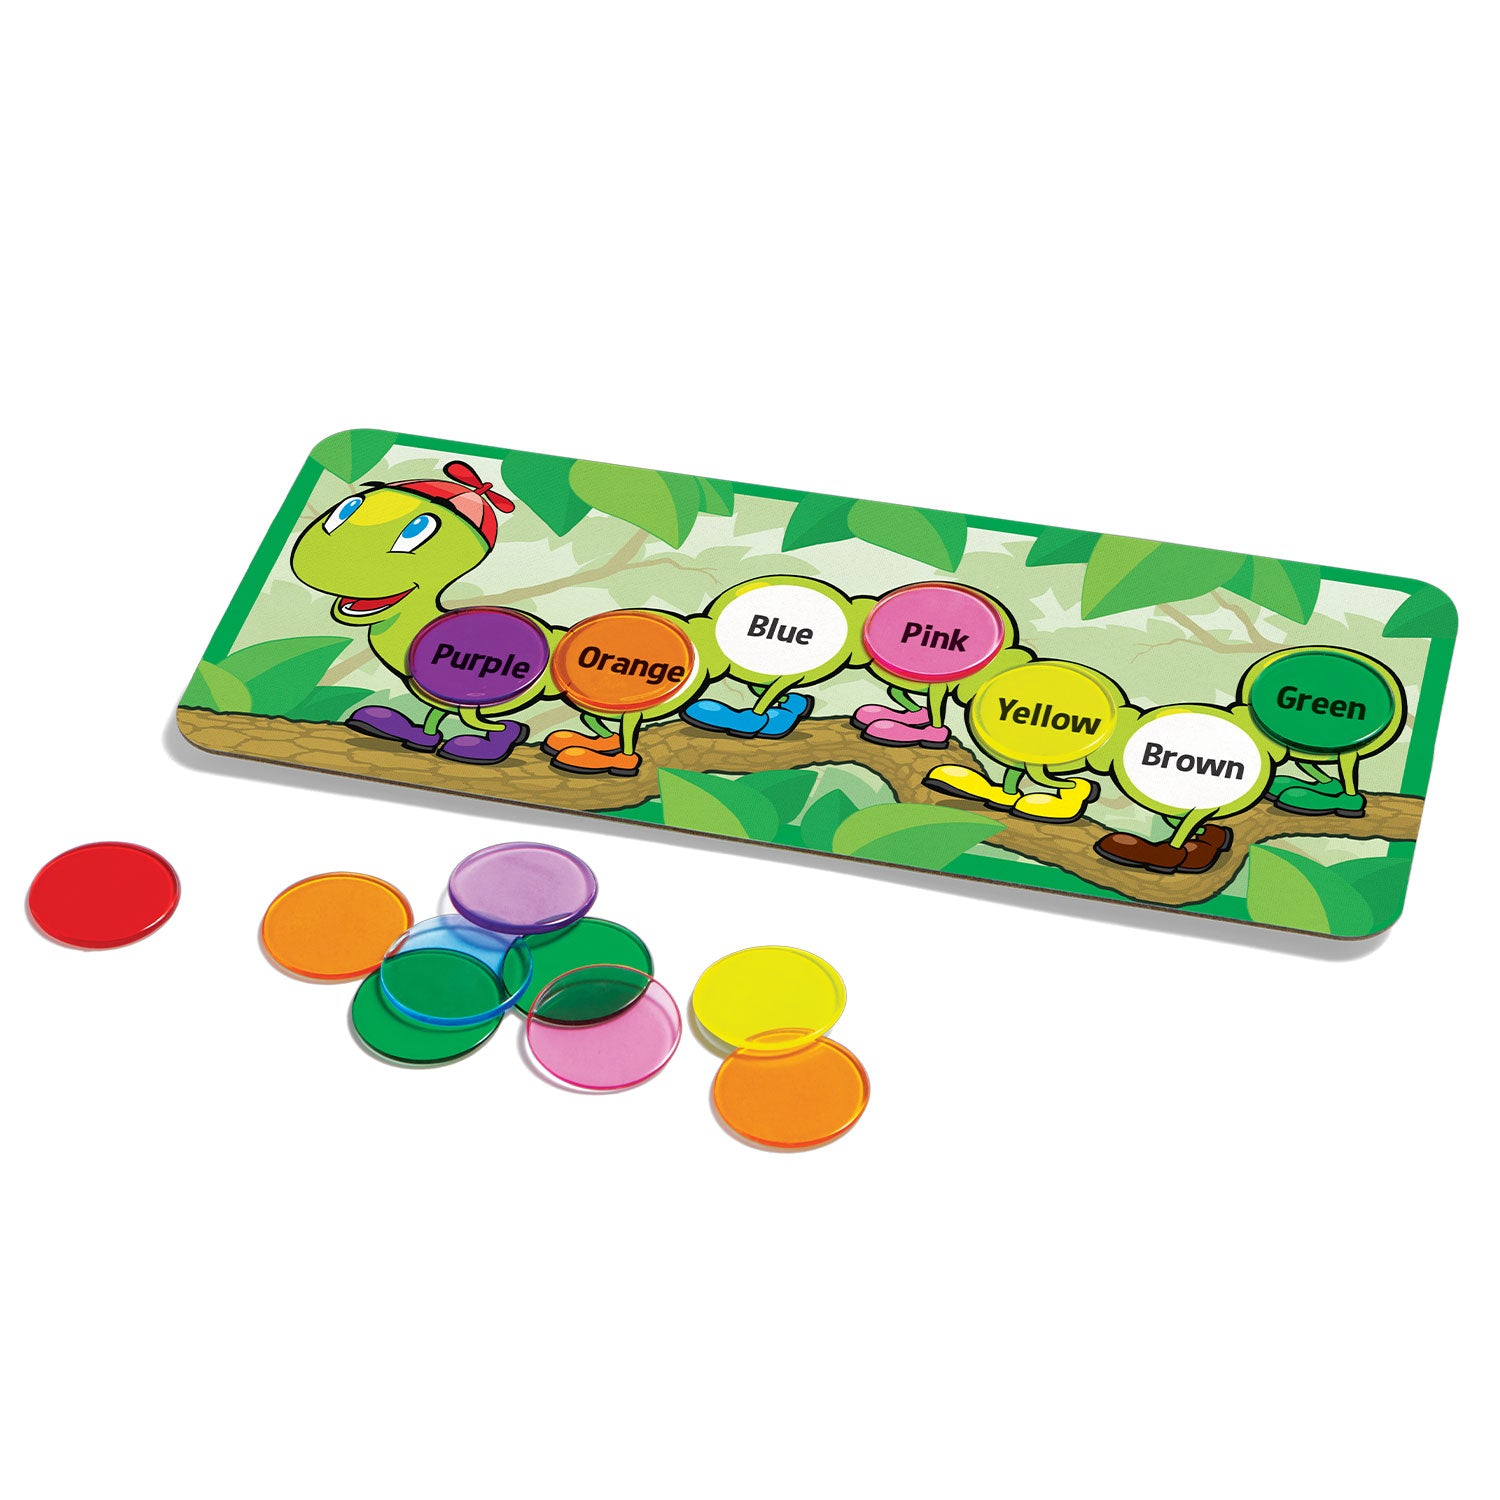 Color Huey & the Four Seasons by SimplyFun is a color and early reading game for ages 3 and up